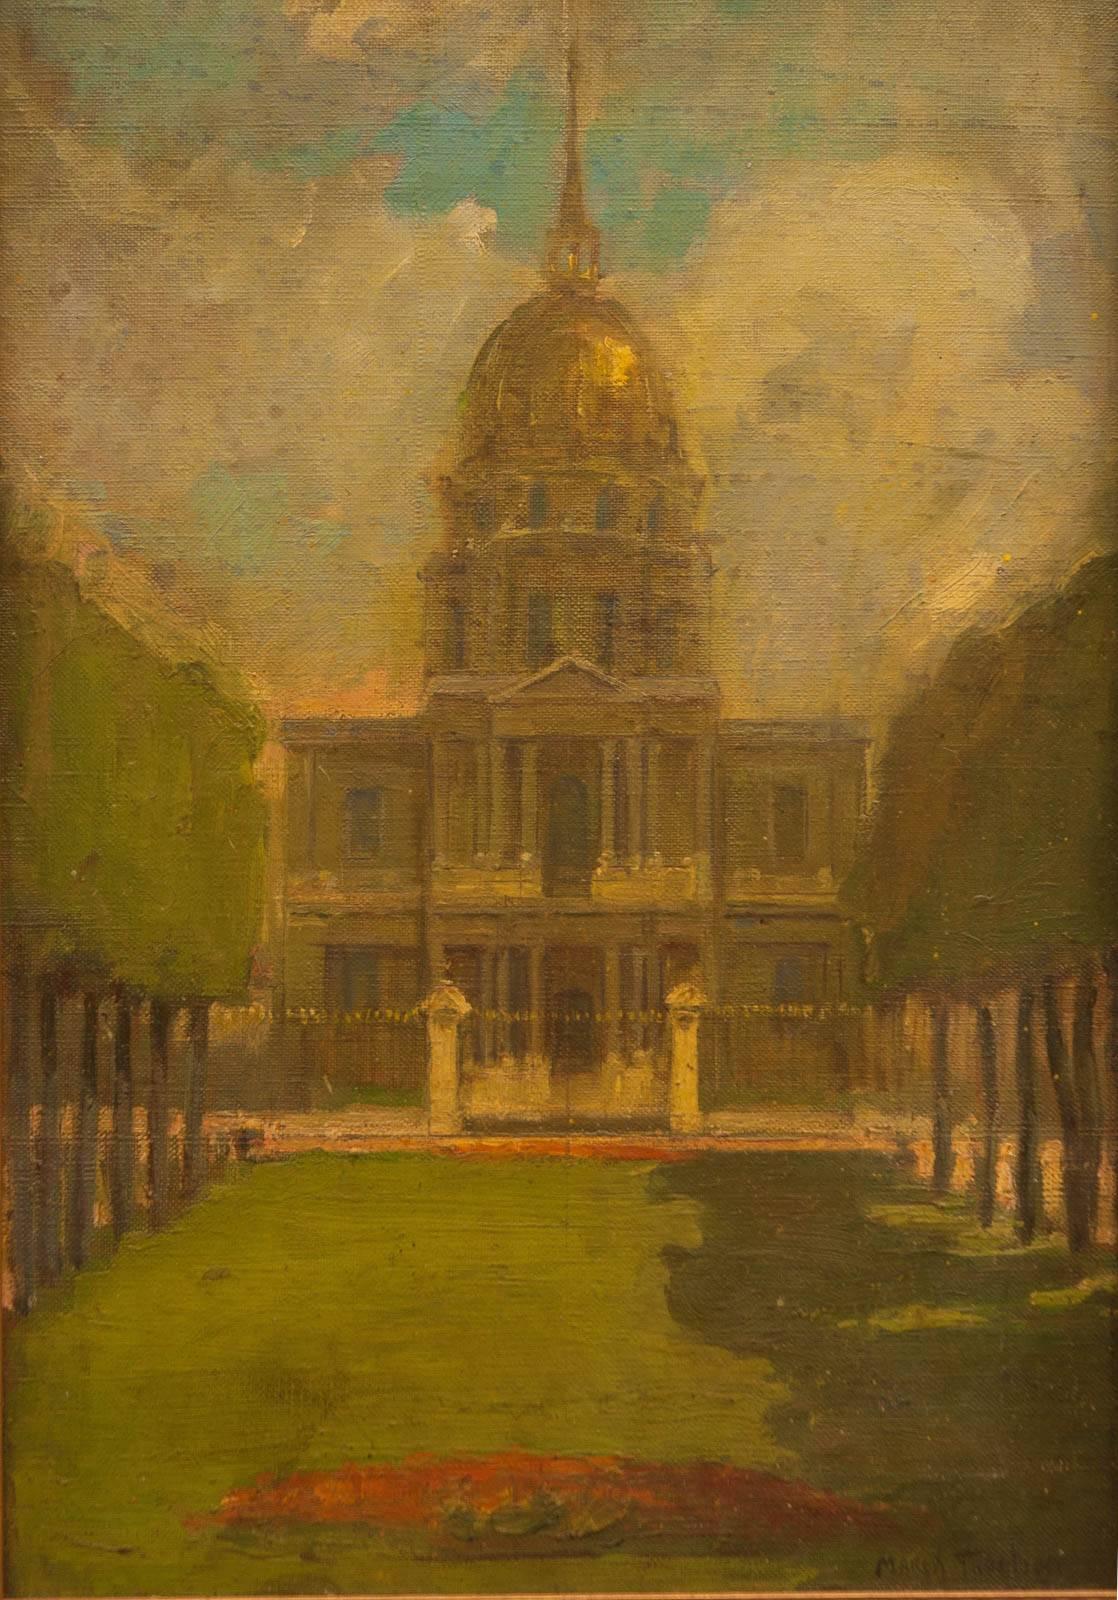 A California Plen Aire painting of the “Dome Des Invalides”, signed in the lower right. A good number of California artists sought training with Frances, great Impressionists. Froelich studied with William Keith and Arthur Mathews in the United